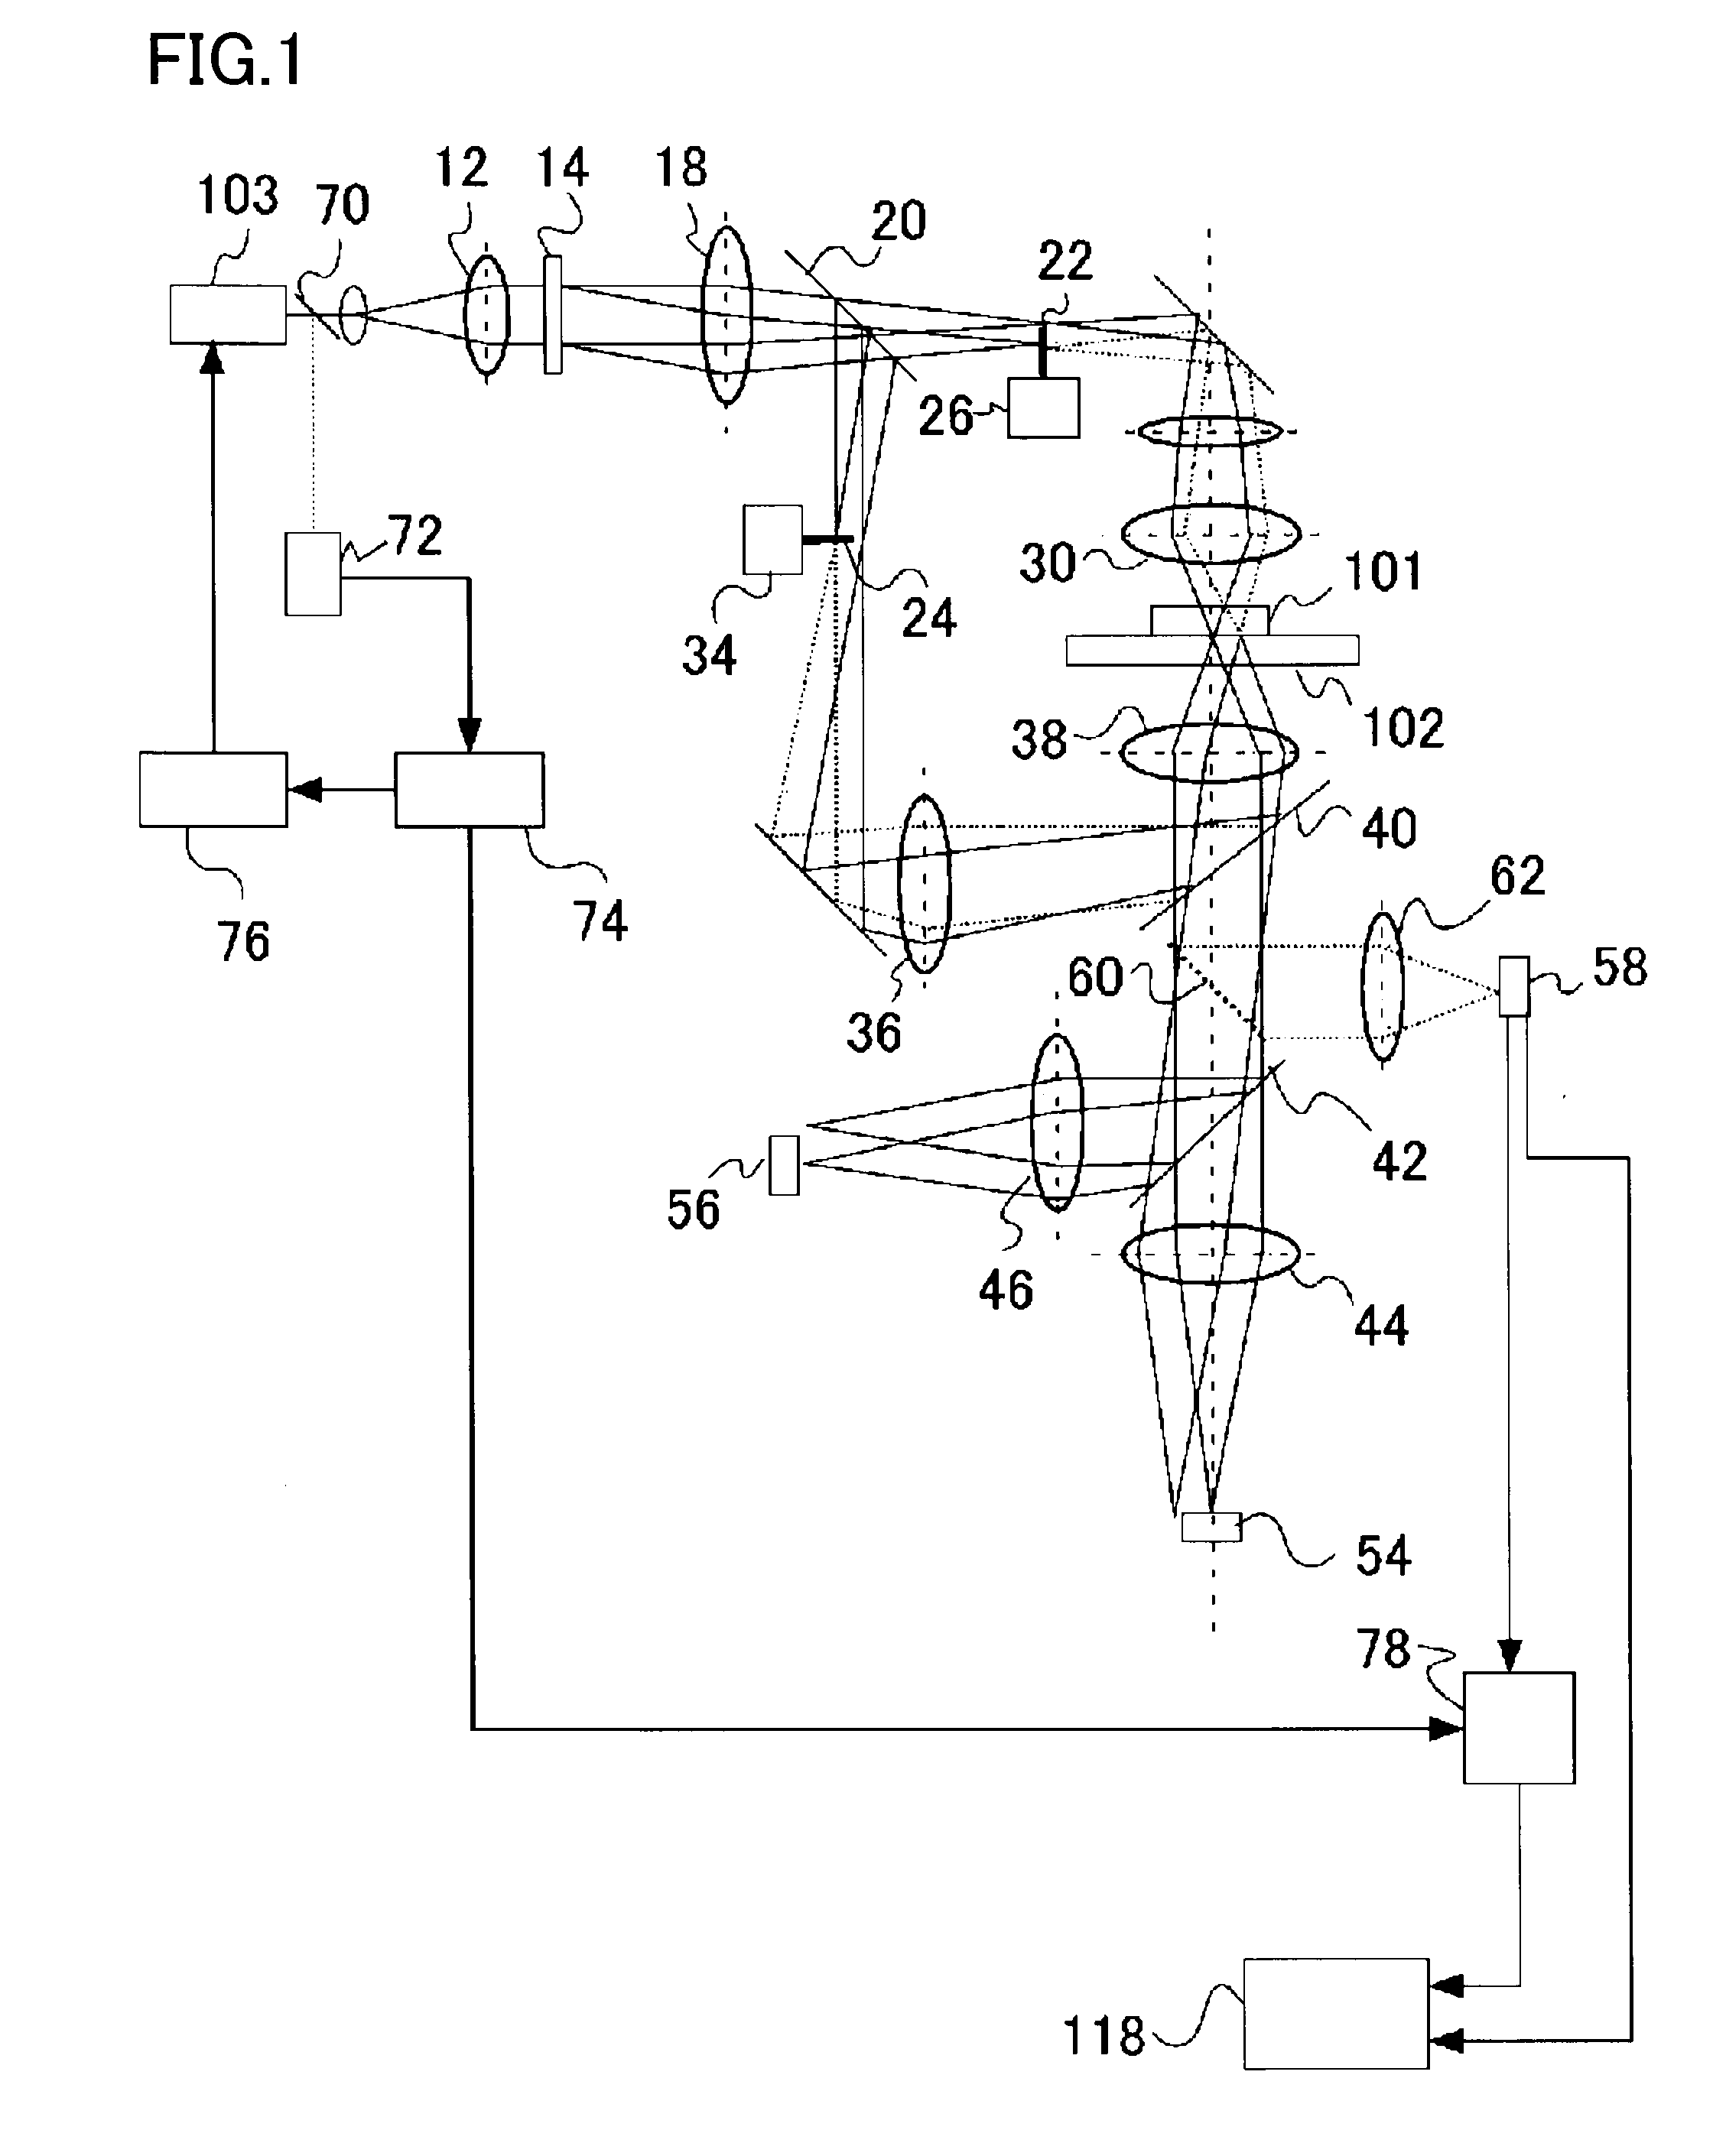 Reticle defect inspection apparatus and reticle defect inspection method